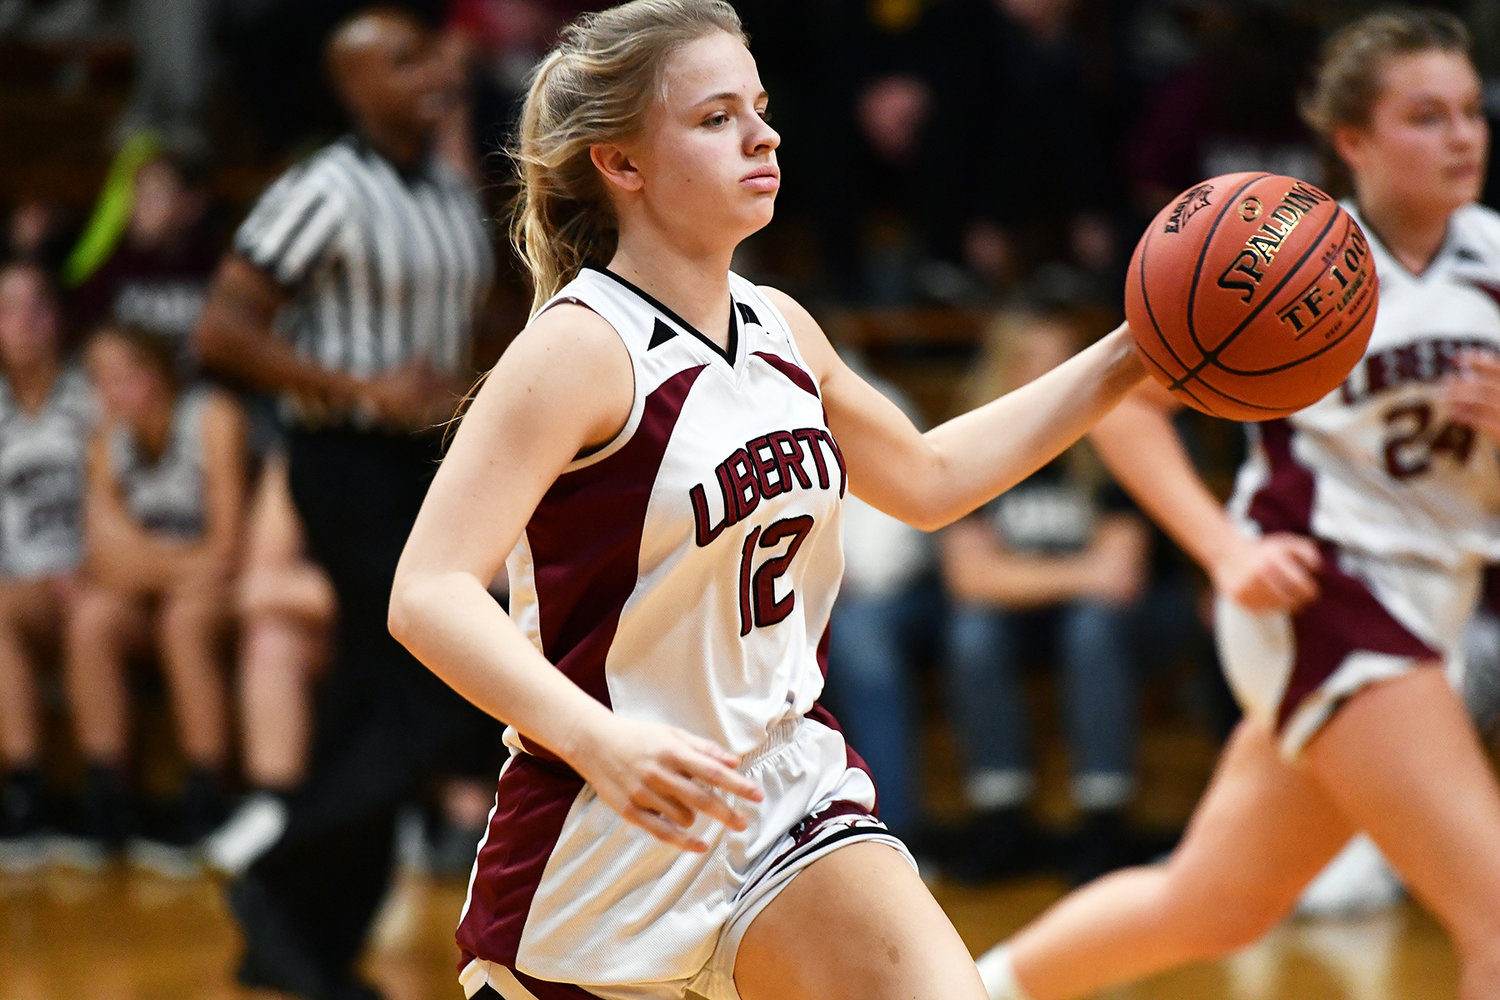 PERFECT START — Liberty Christian’s Alli Meyer dribbles up the court in a game earlier this season. The Eagles have remained unbeaten through their first 14 games to open the season, beating Valley 86-23 in the first round of the Bourbon Tournament Tuesday.